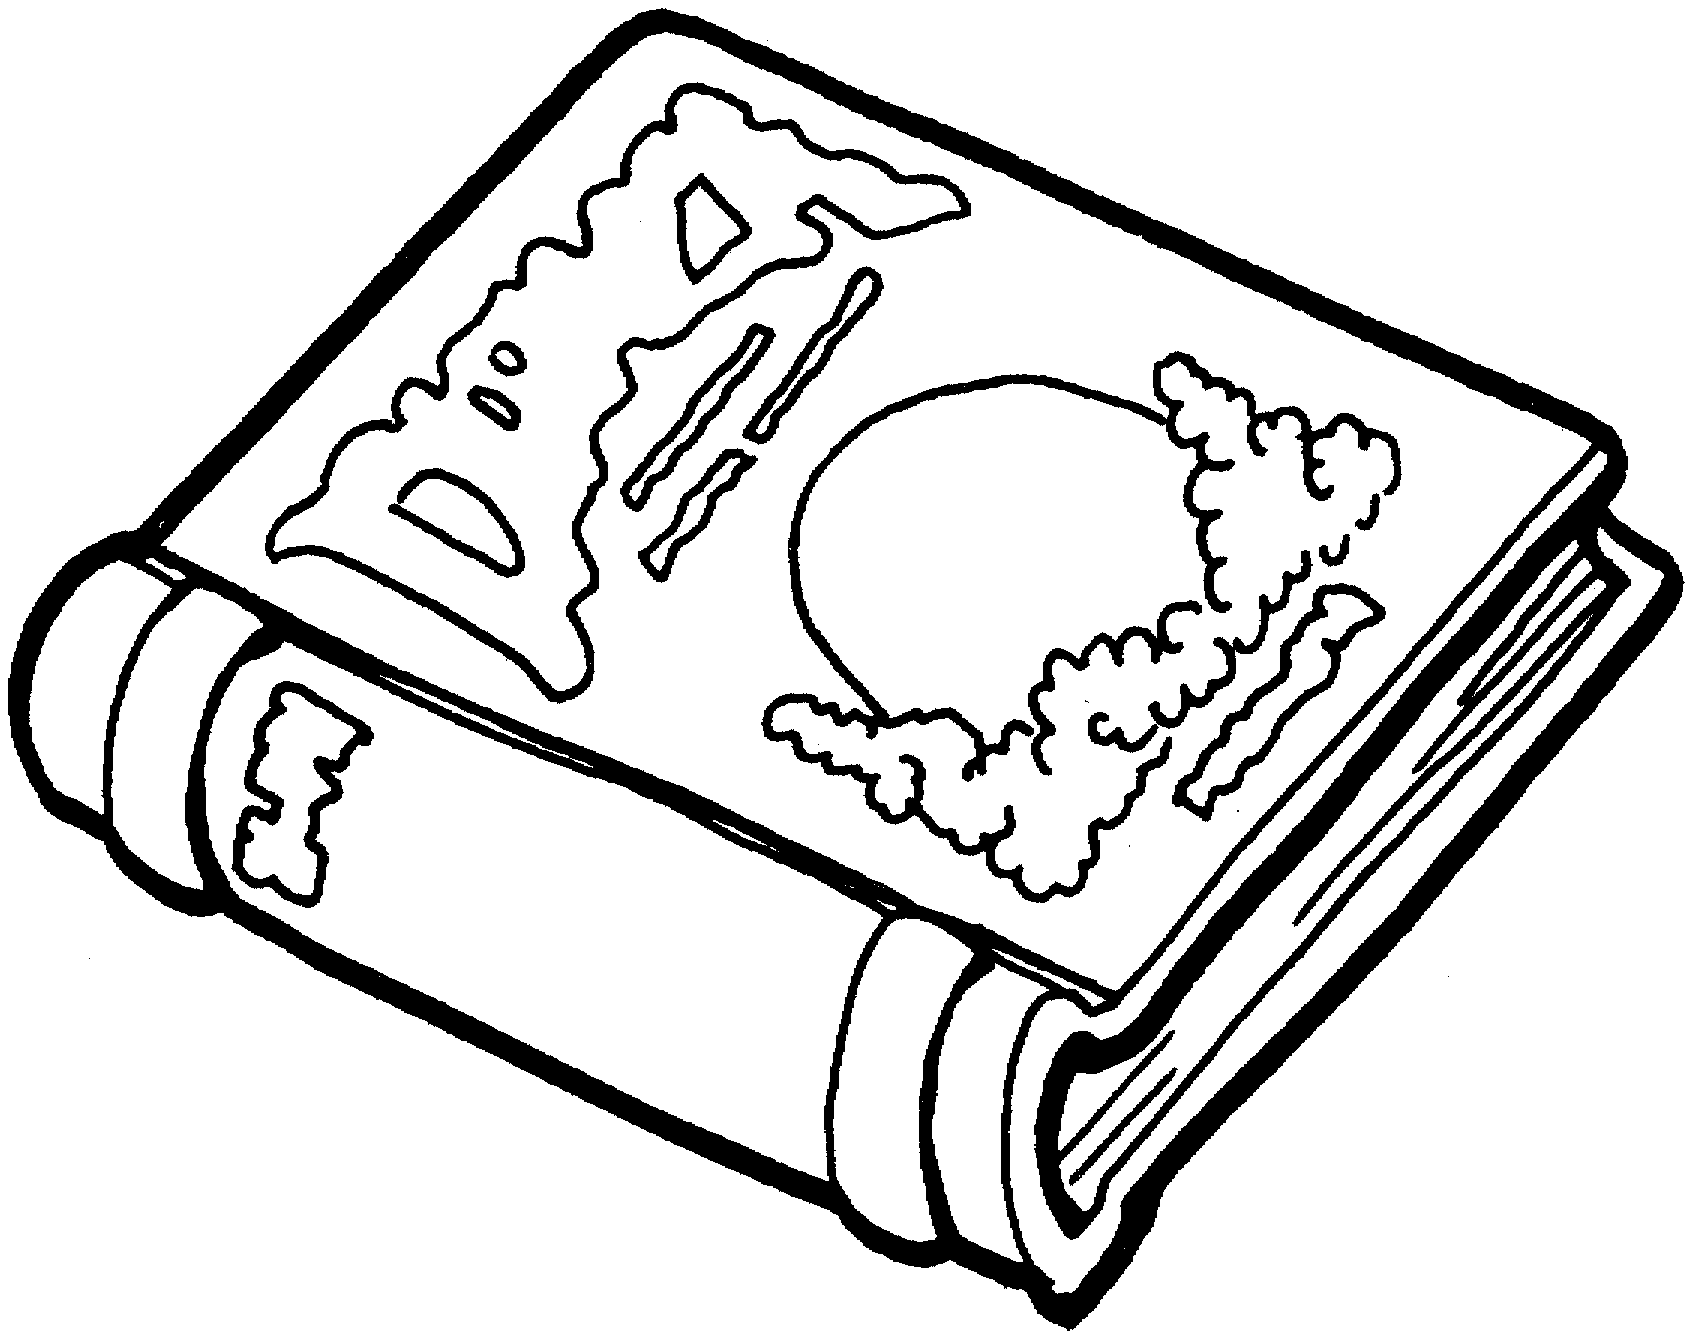 Coloring Page Book - Coloring Pages For All Ages